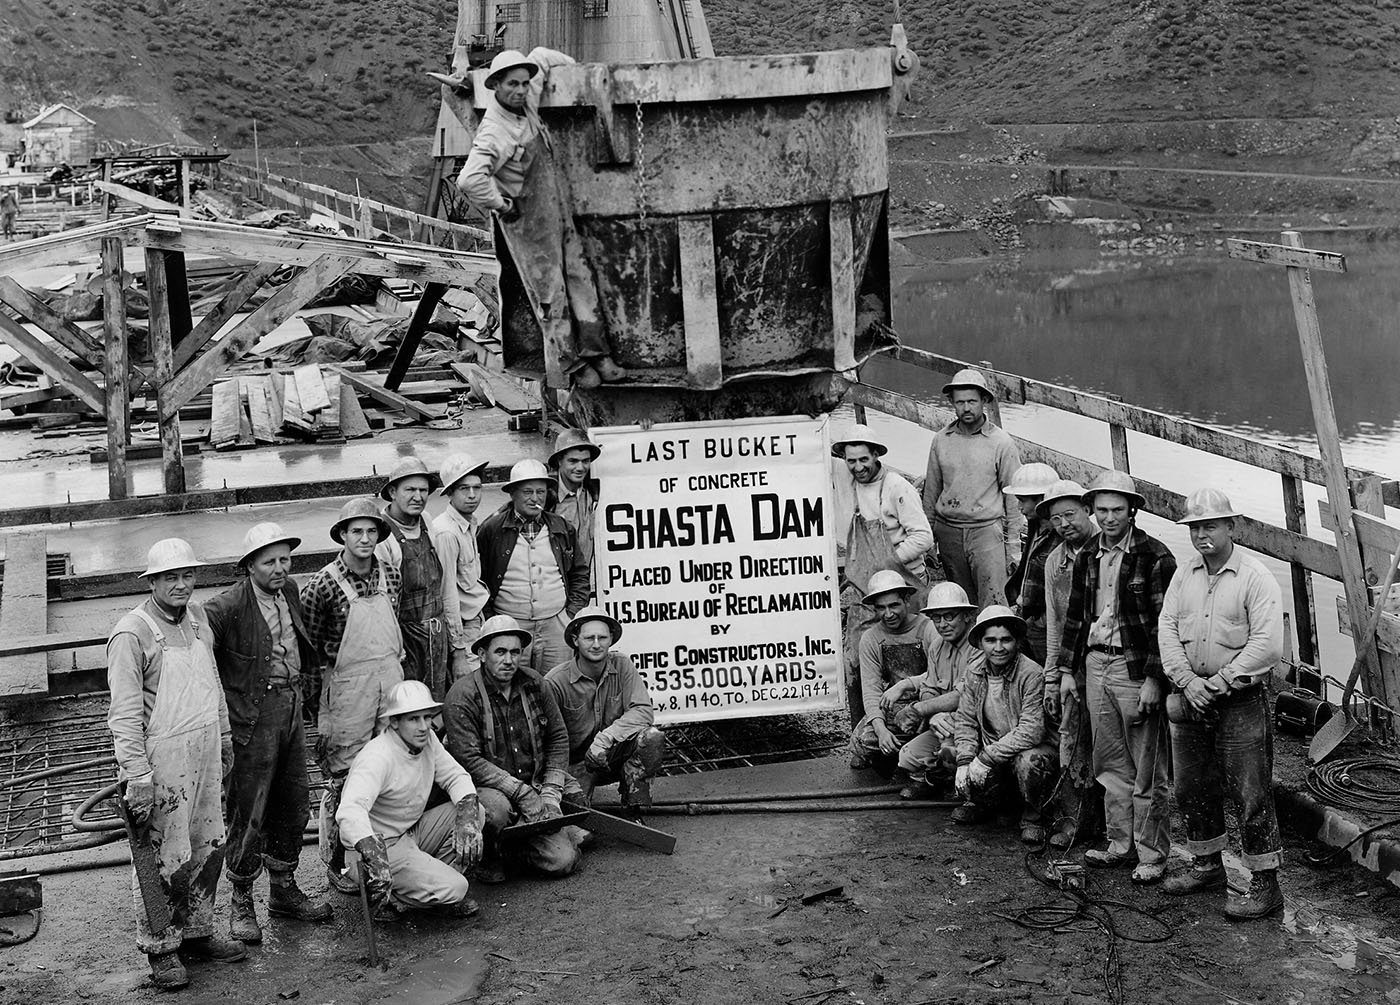  Shasta County — Crew of Pacific Constructors, Inc. grouped around the last bucket of concrete spilled for Shasta Dam on Dec. 22, 1944. U.S. Bureau of Reclamation, Central Valley Project History   